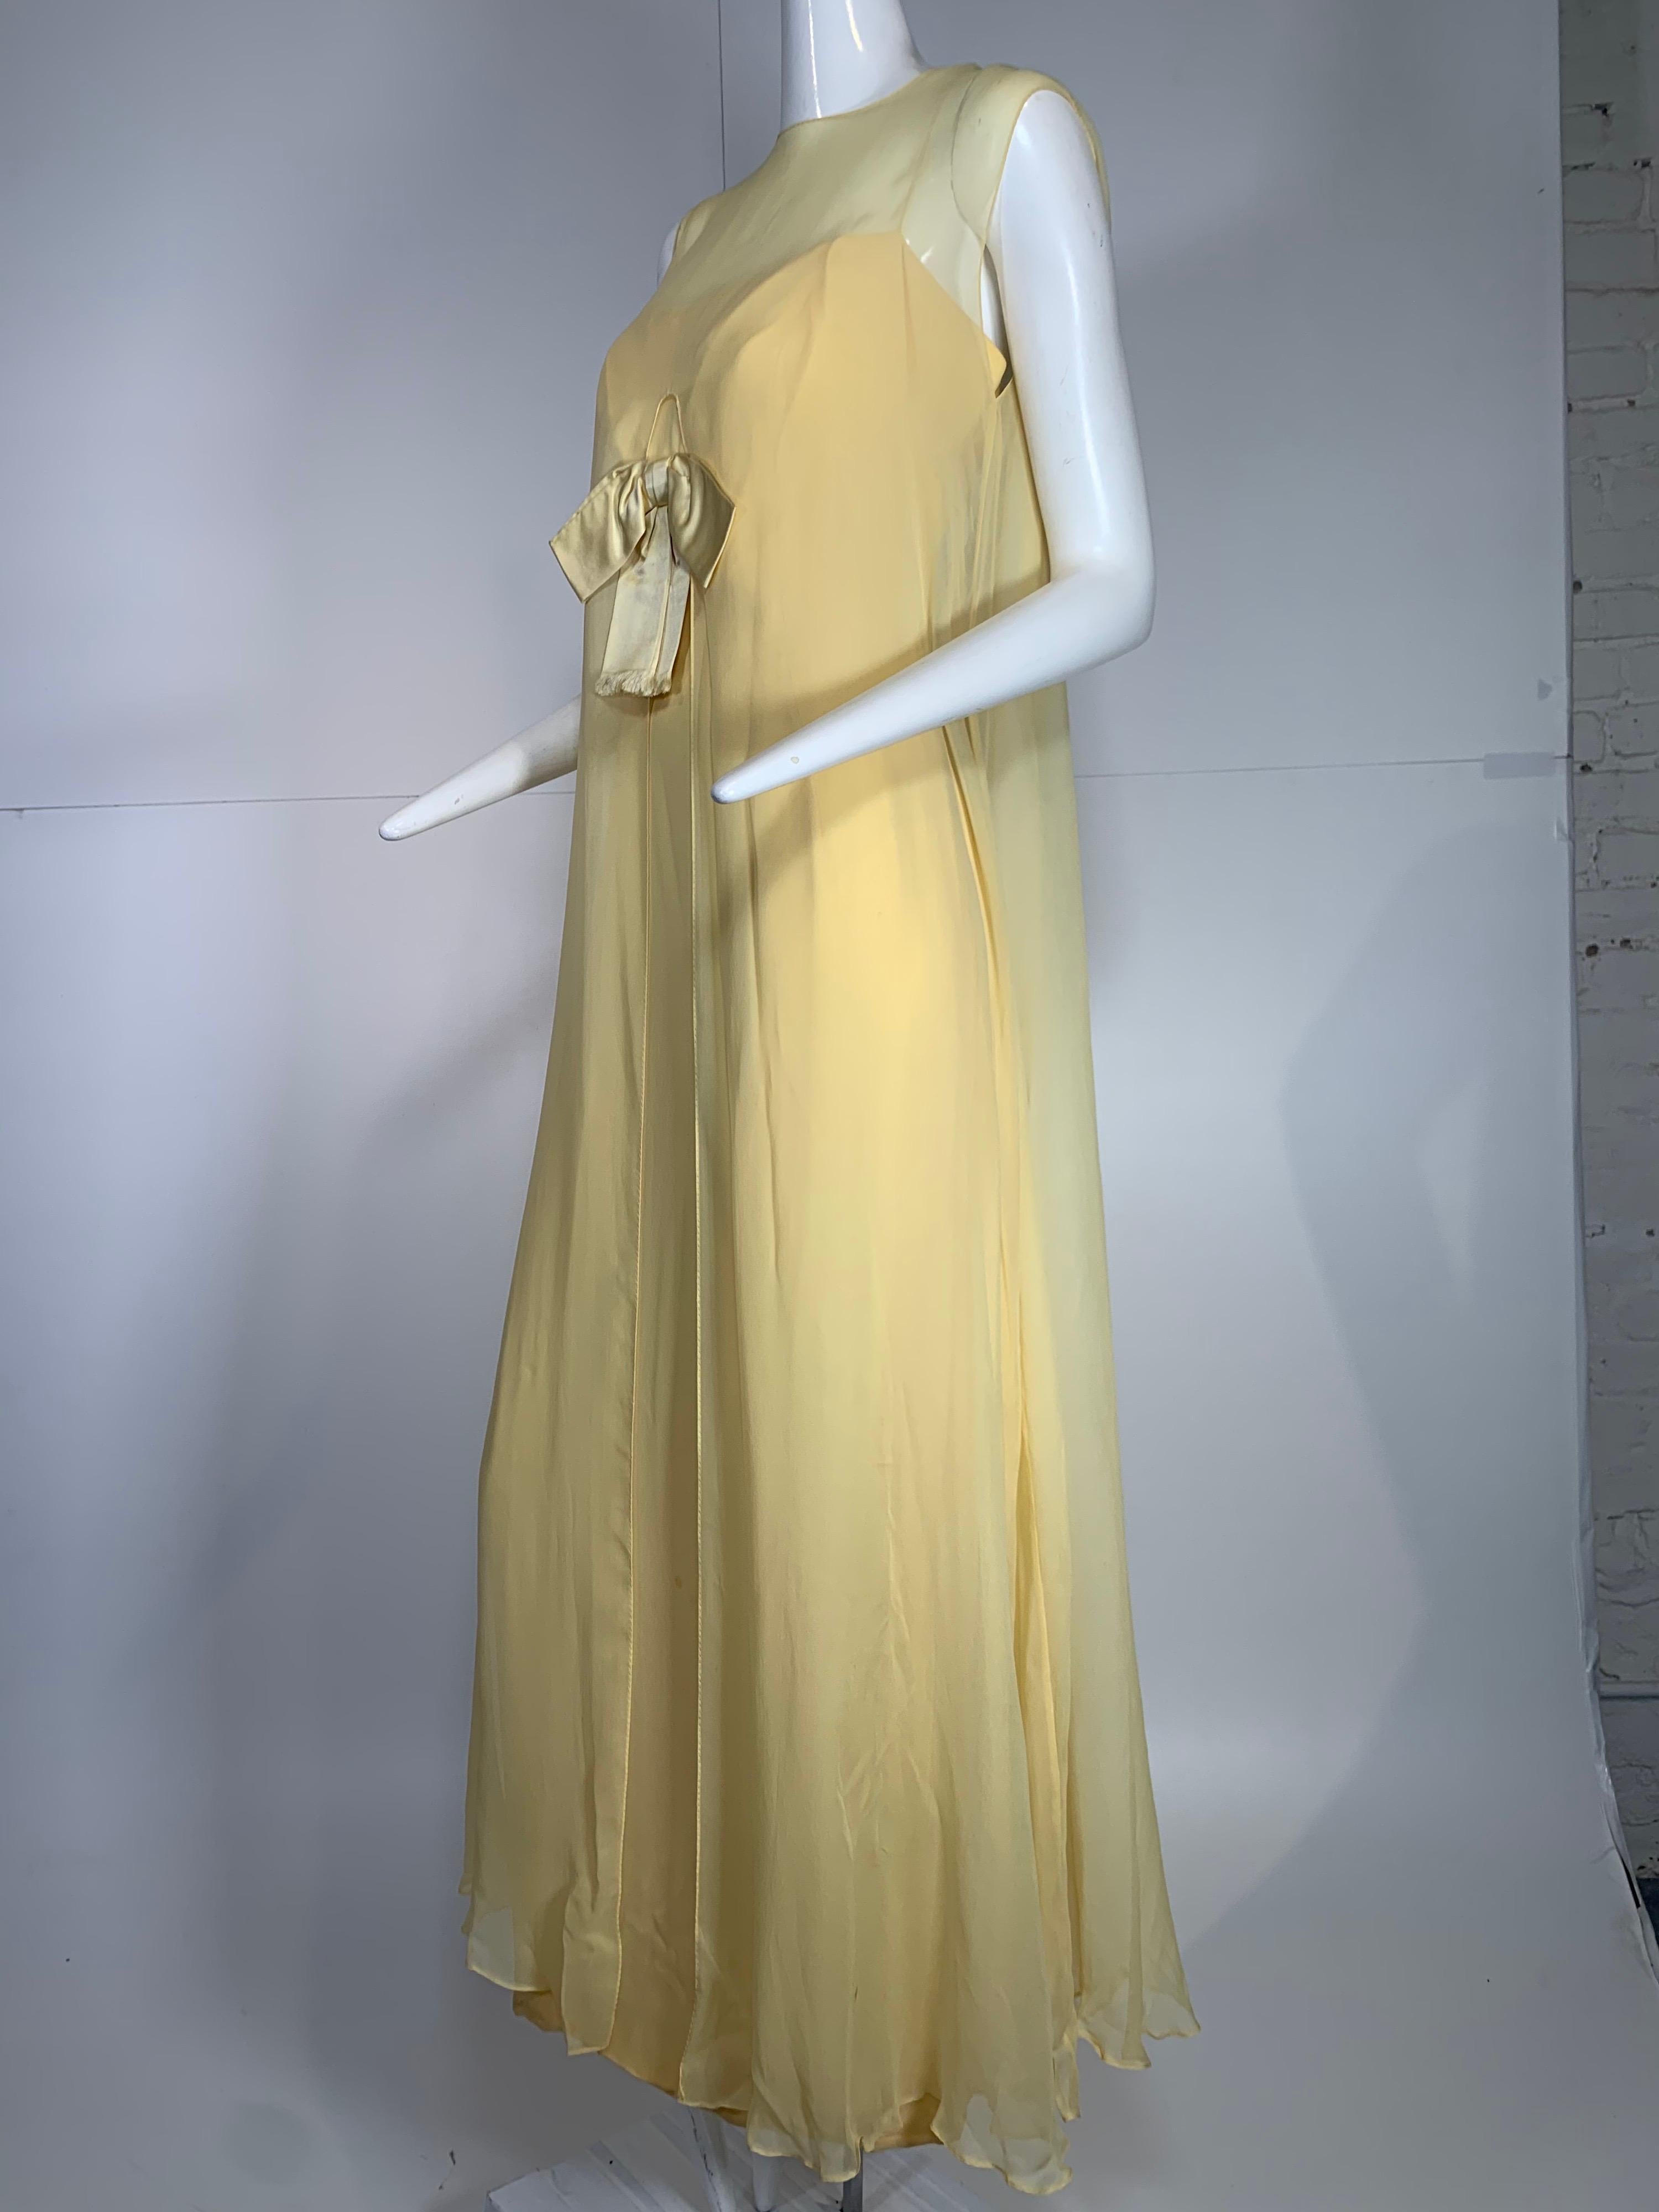 1960s Bonwit Teller pale butter yellow silk chiffon column gown with front bow. Separate overlay layer which is split at front allowing the bow on gown bodice to sit outside the overlay. Zipper at back of column. So gorgeous. 